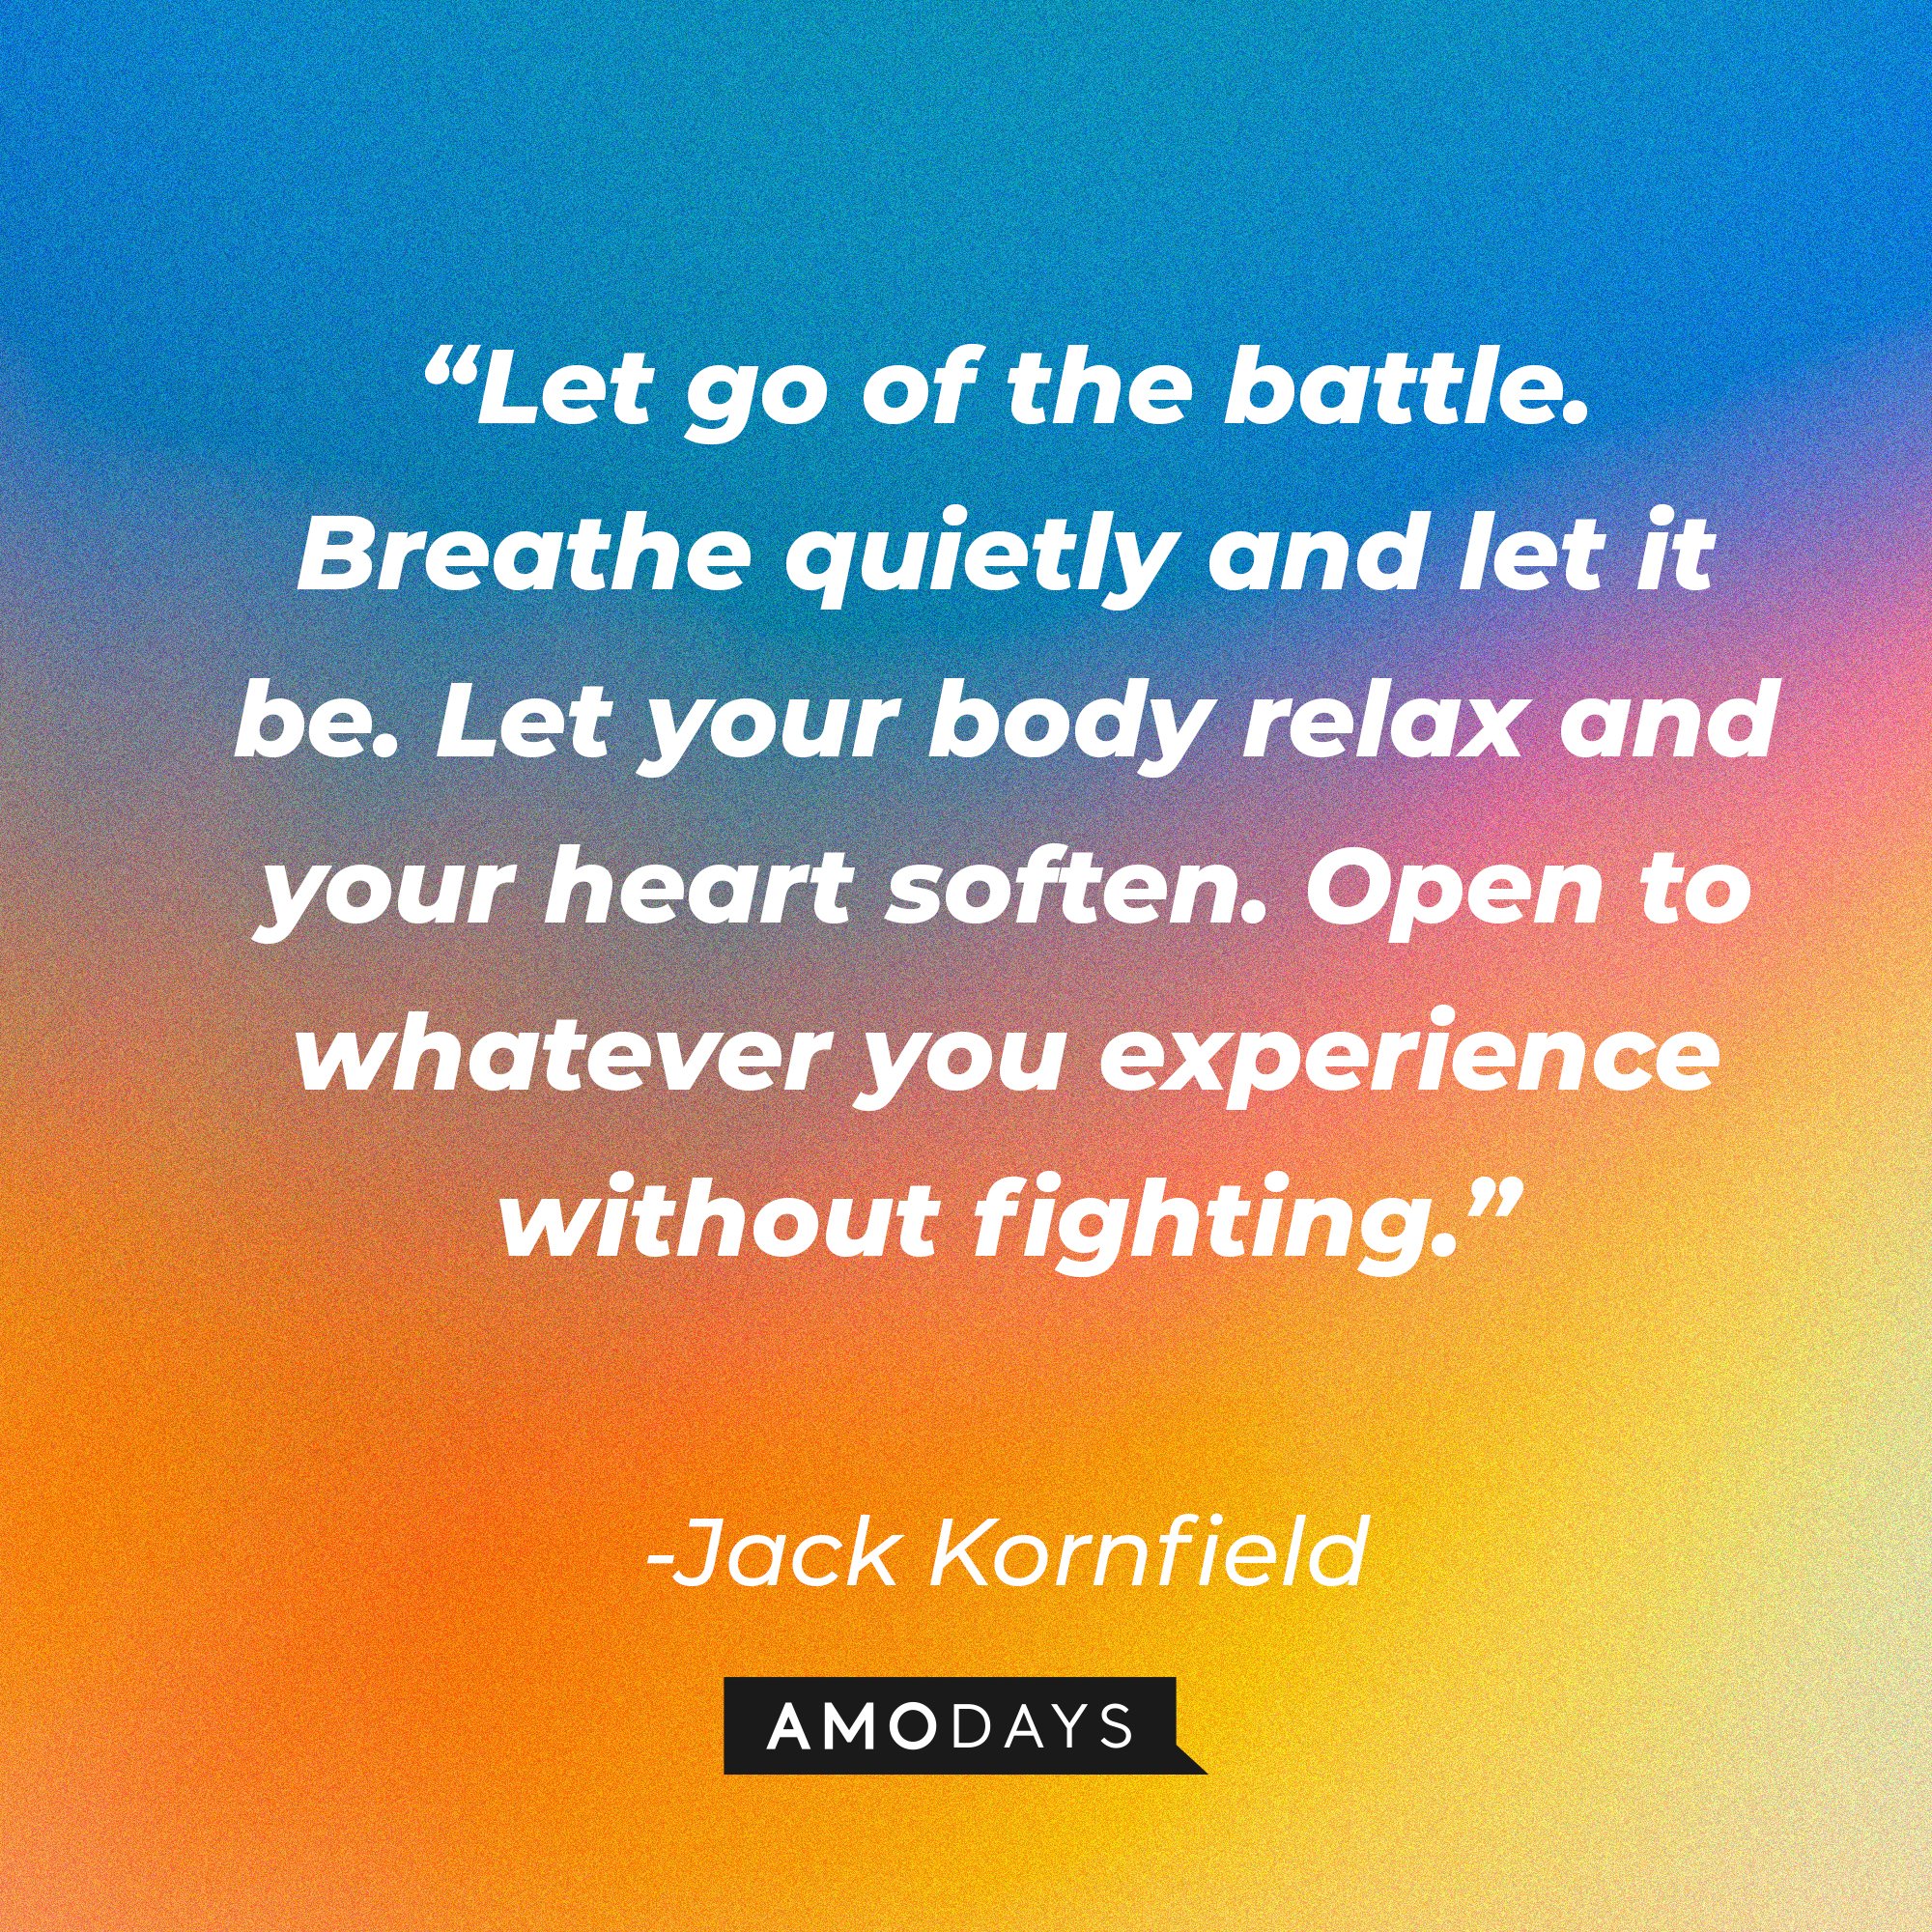 Jack Kornfield's quote: “Let go of the battle. Breathe quietly and let it be. Let your body relax and your heart soften. Open to whatever you experience without fighting.” | Image: AmoDays